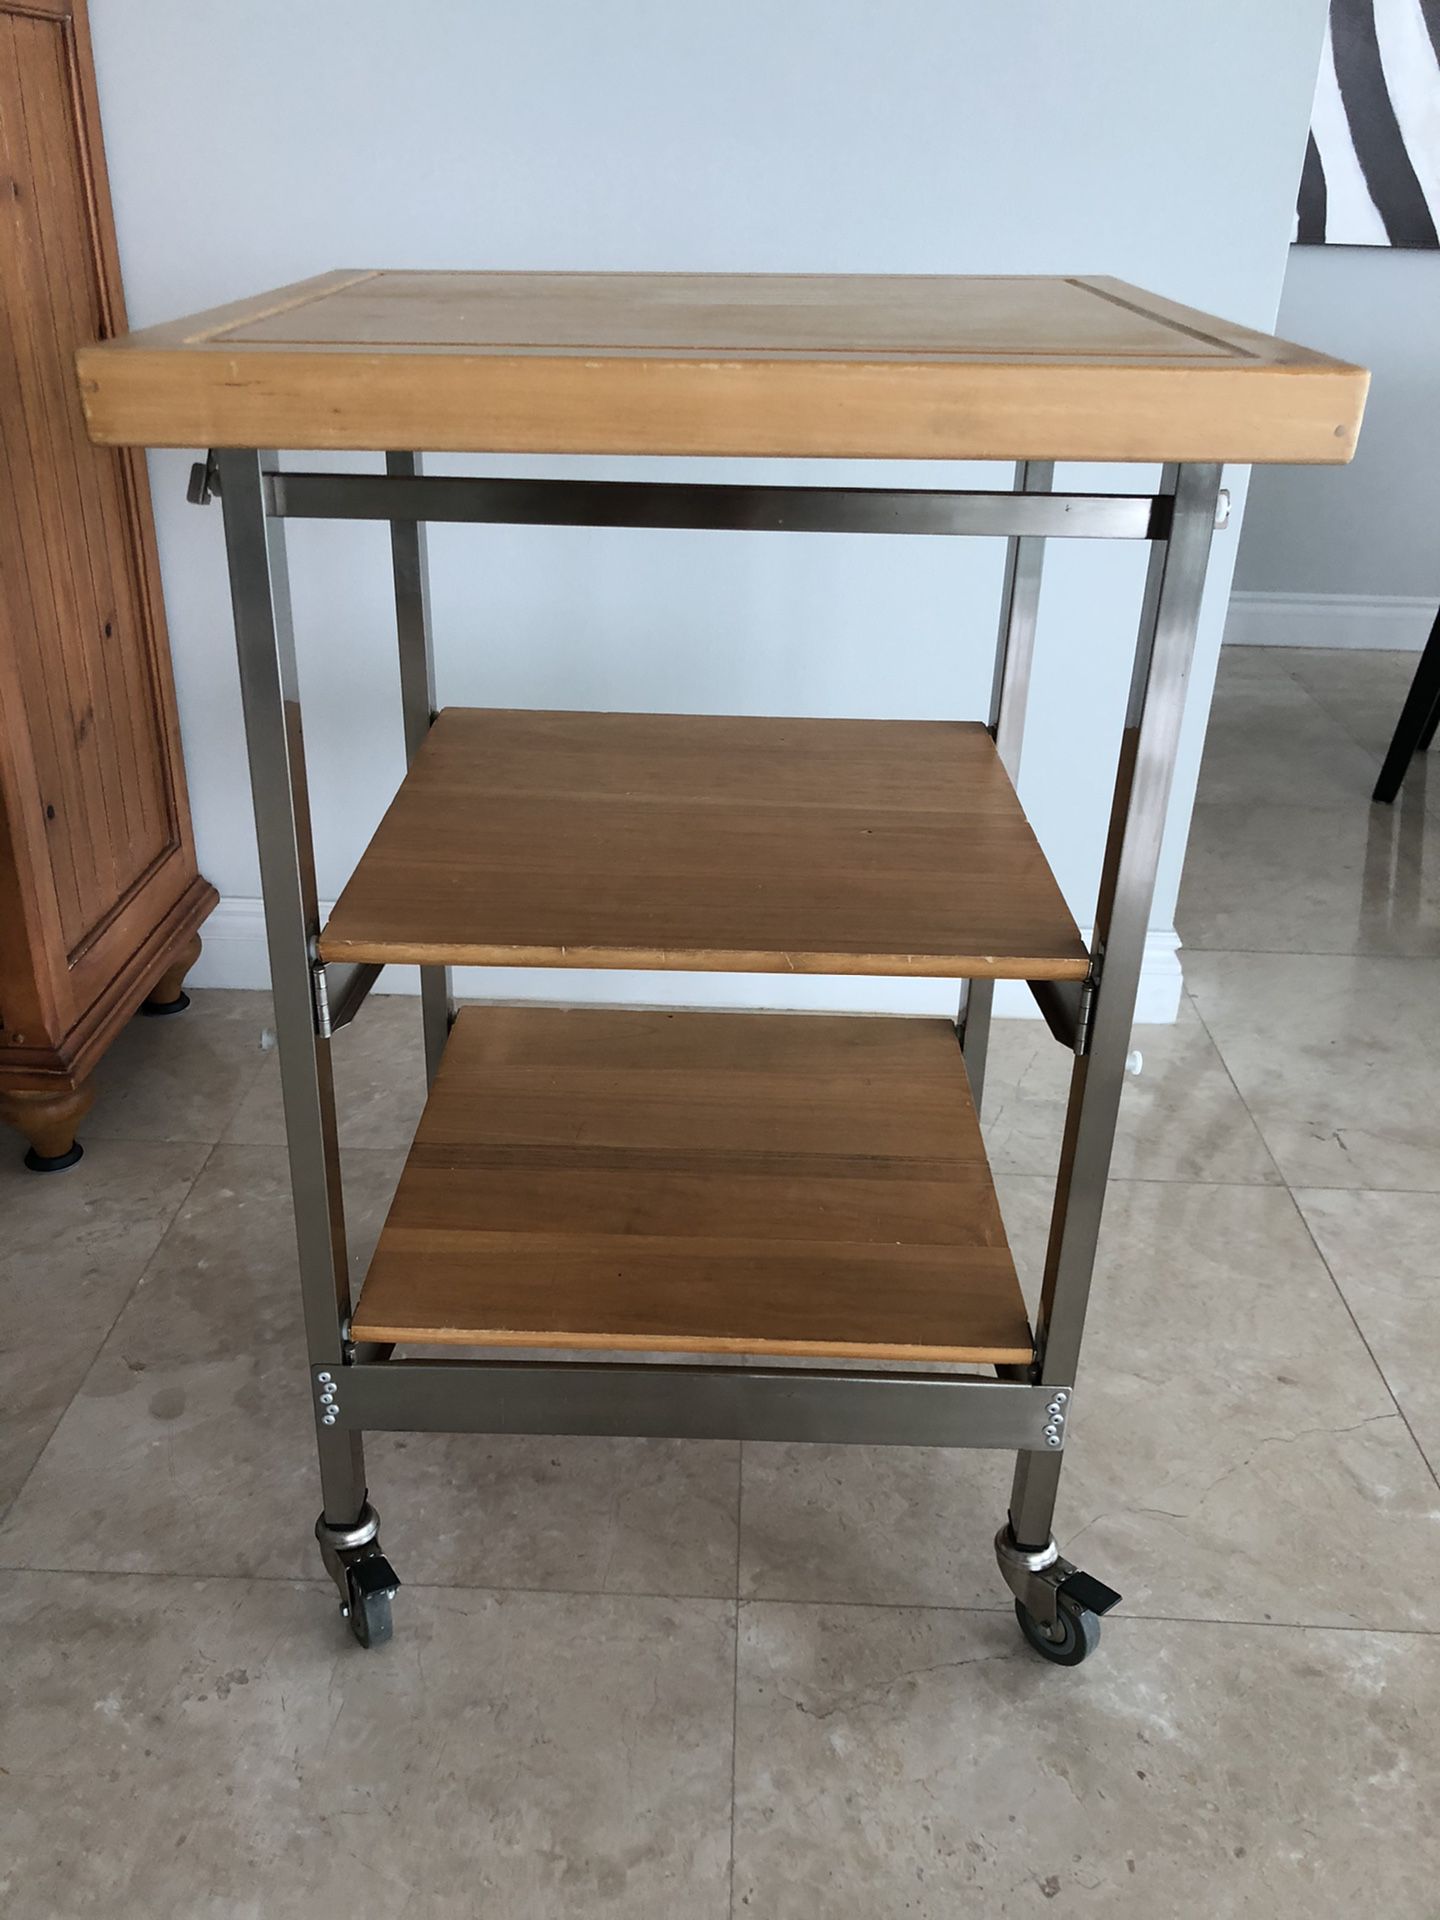 MOVING sale Solid wood folding bakers’ cart origami kitchen cart island